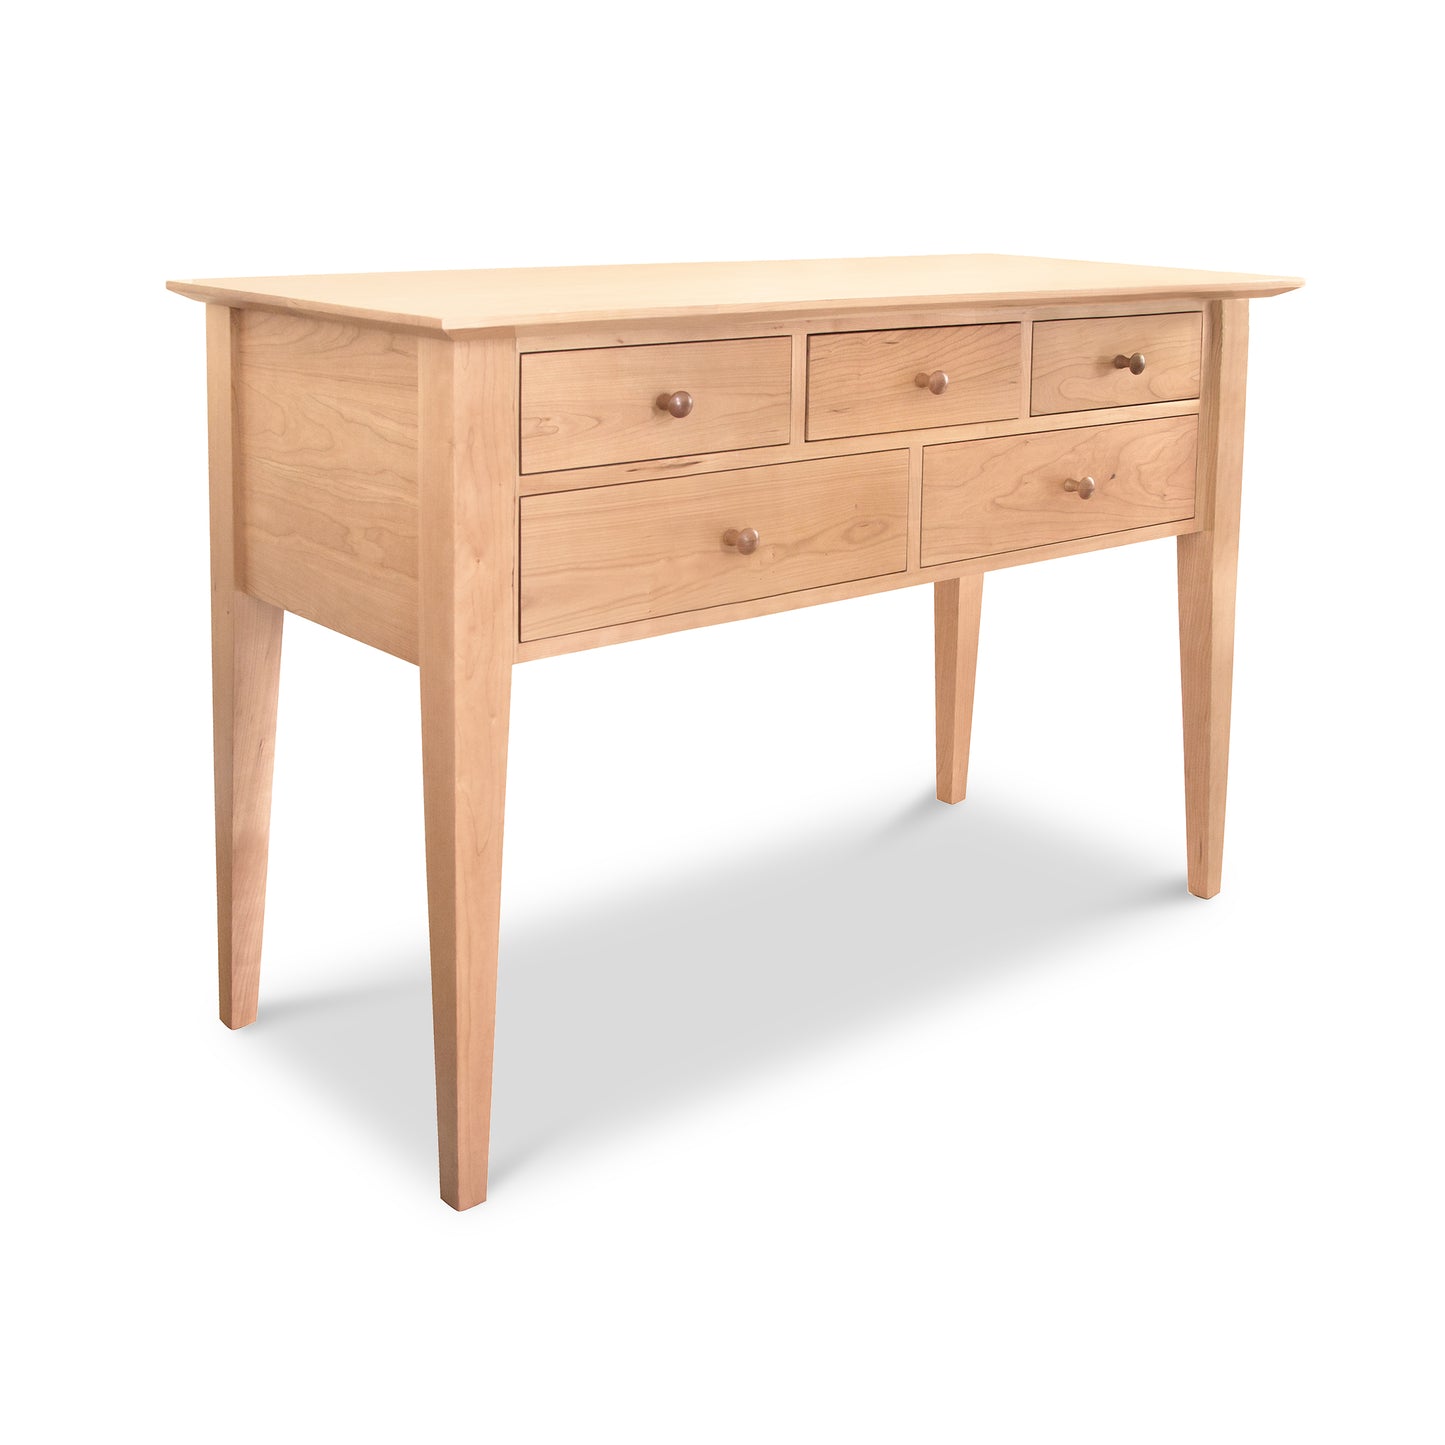 An eco-friendly Classic Shaker Hunt Board by Lyndon Furniture with drawers on it, featuring tapered legs.